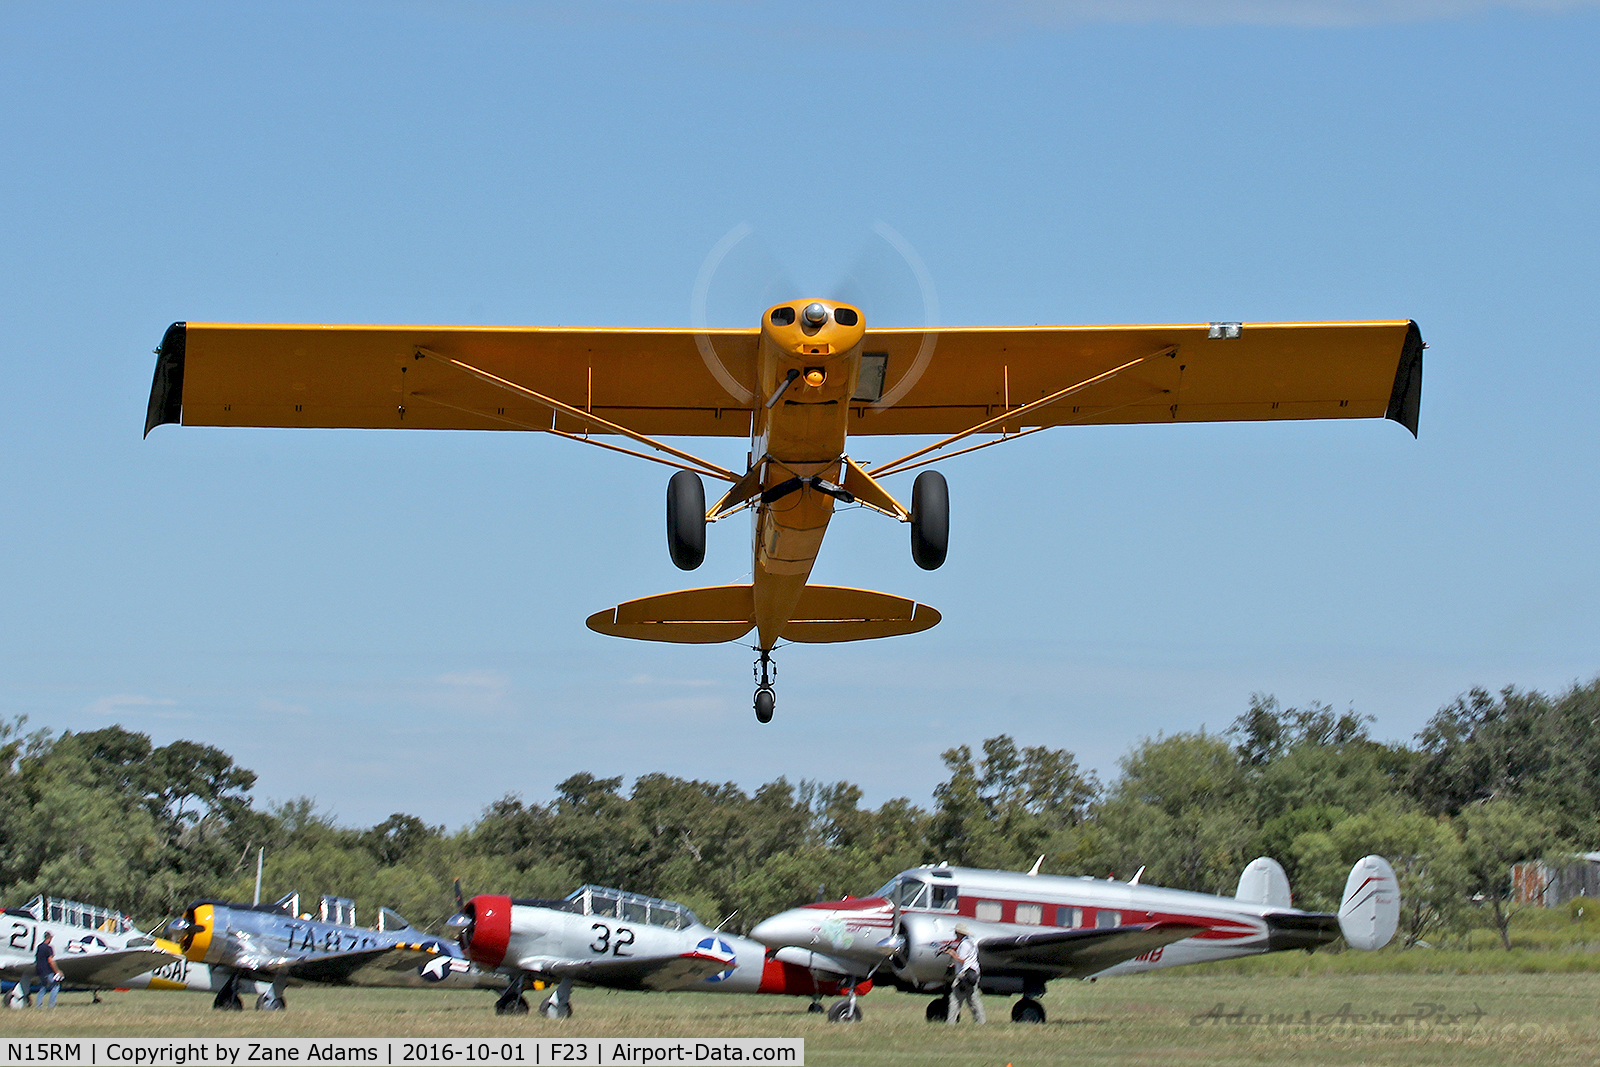 N15RM, 1969 Piper PA-18-150 Super Cub C/N 18-8814, At the 2016 Ranger, Texas Fly-in